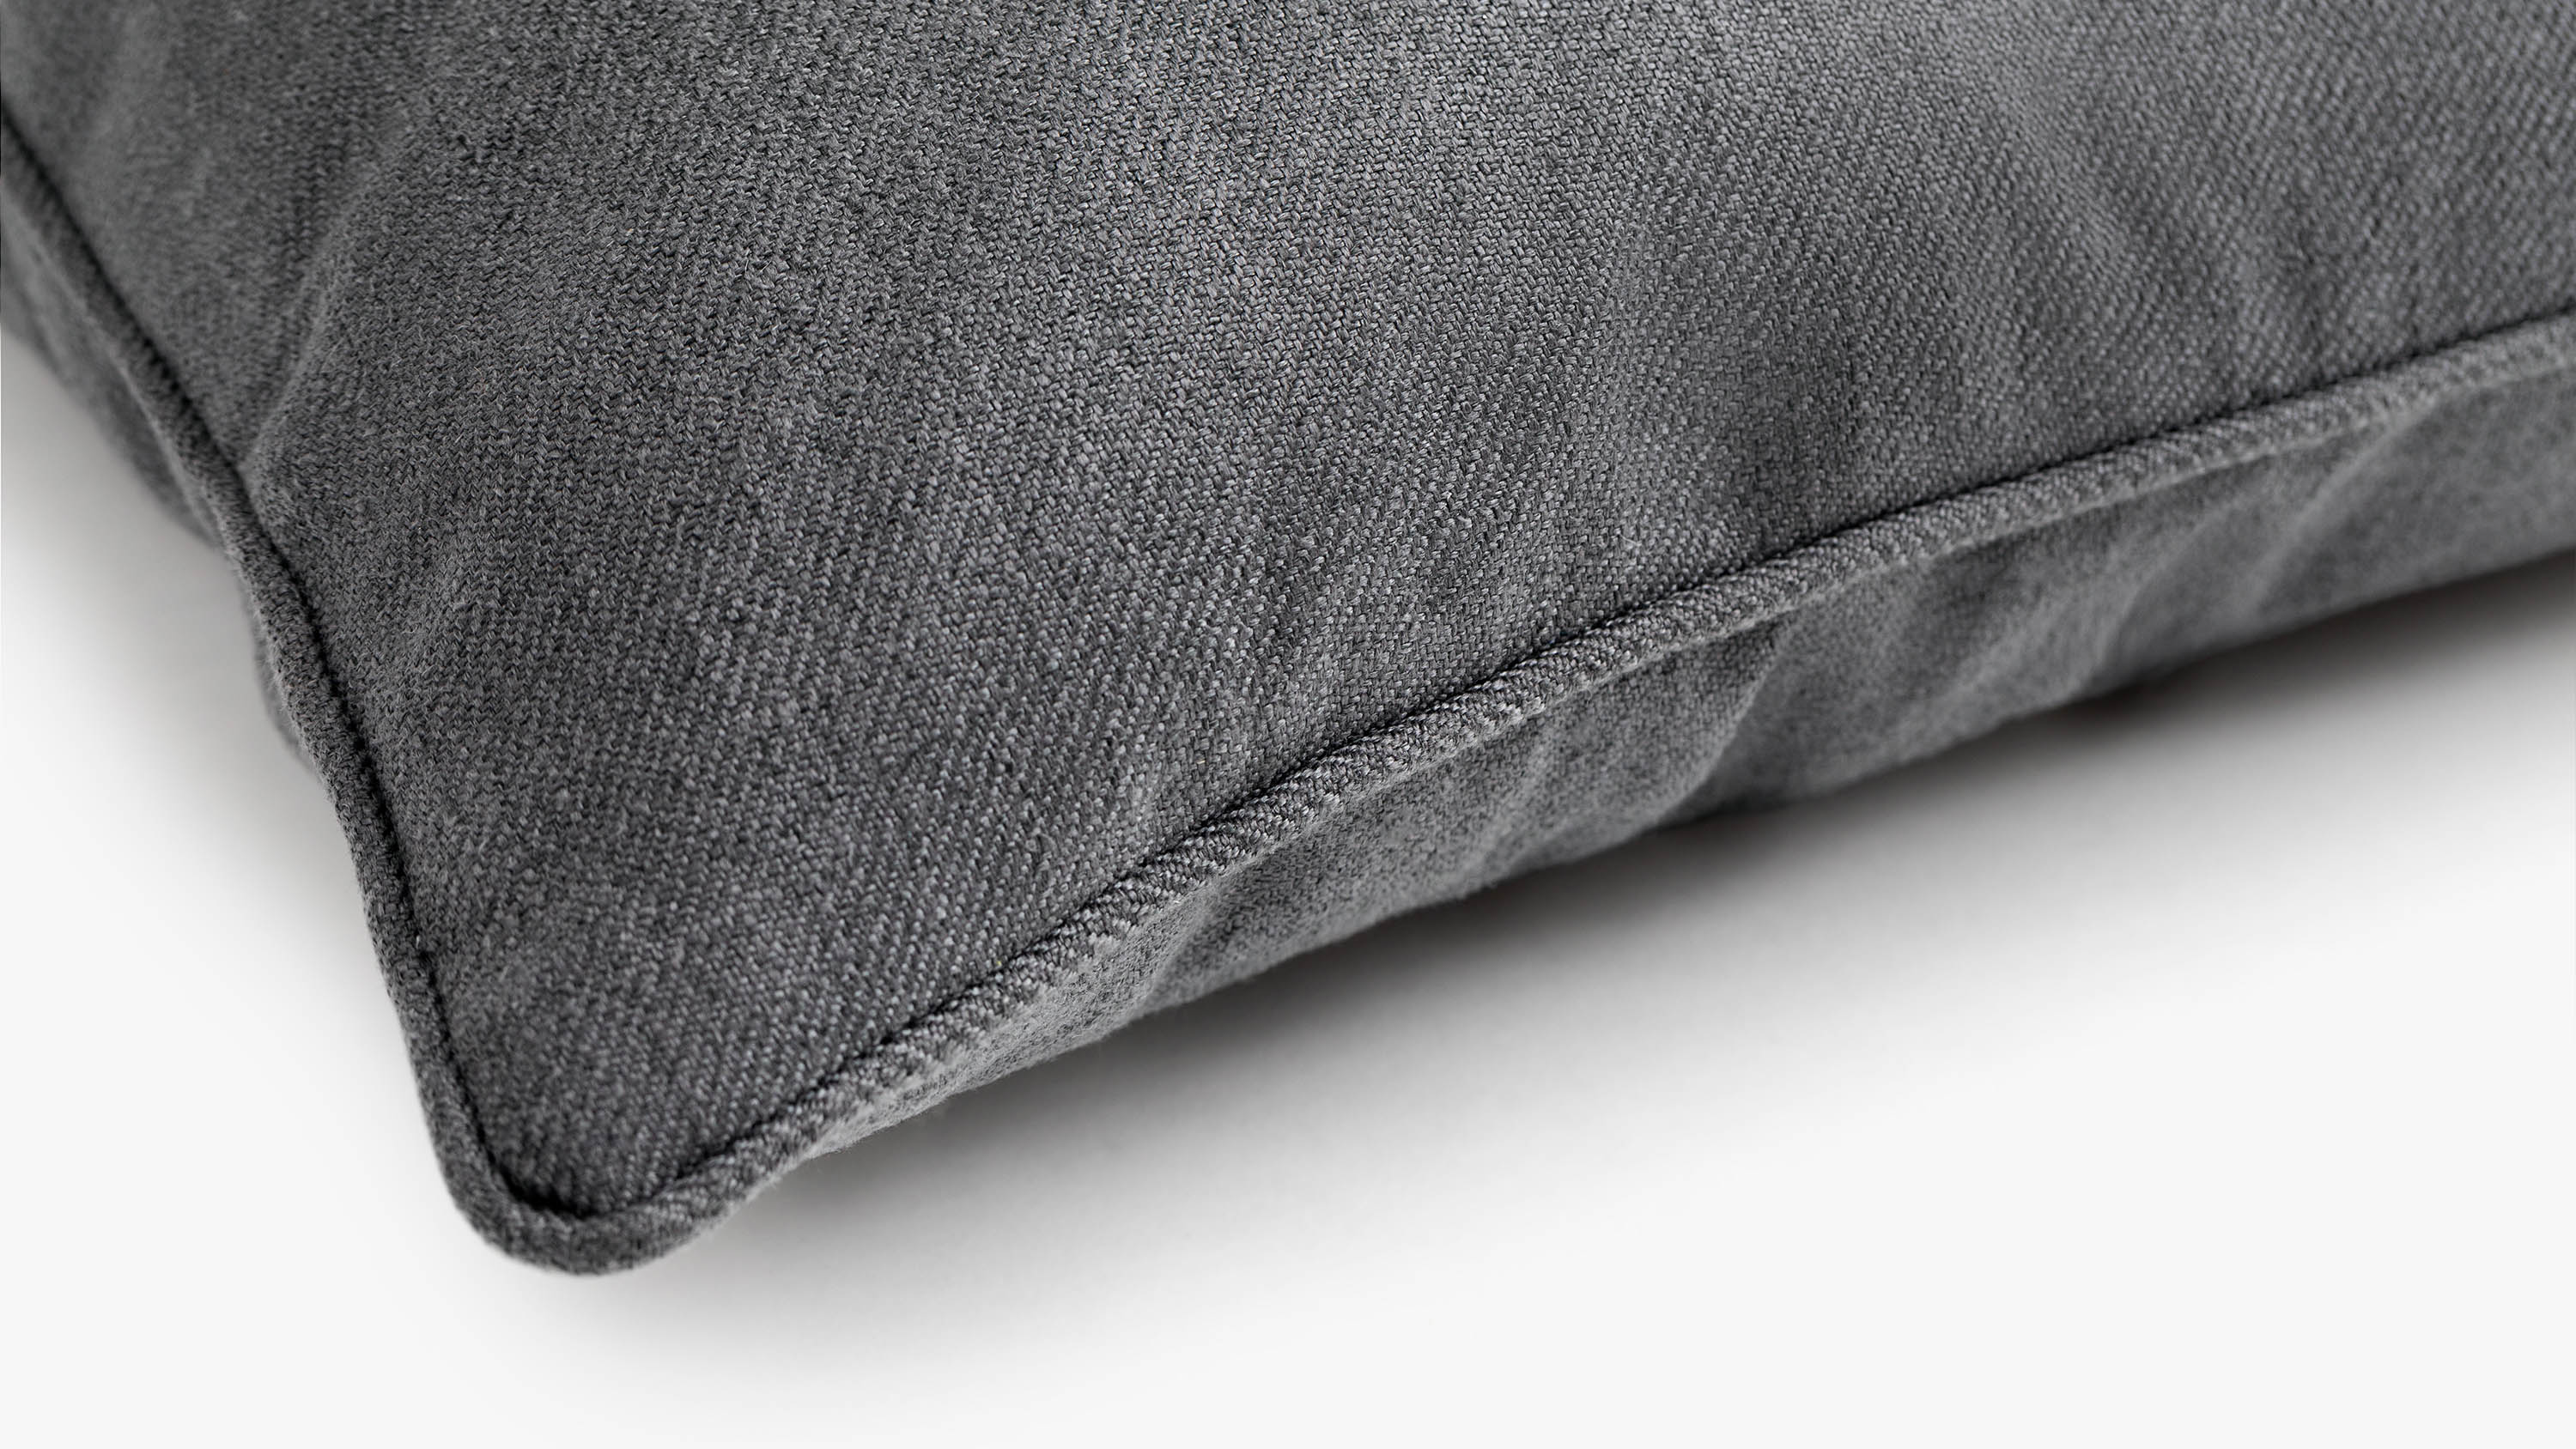 The eden fabric cushion - charcoal